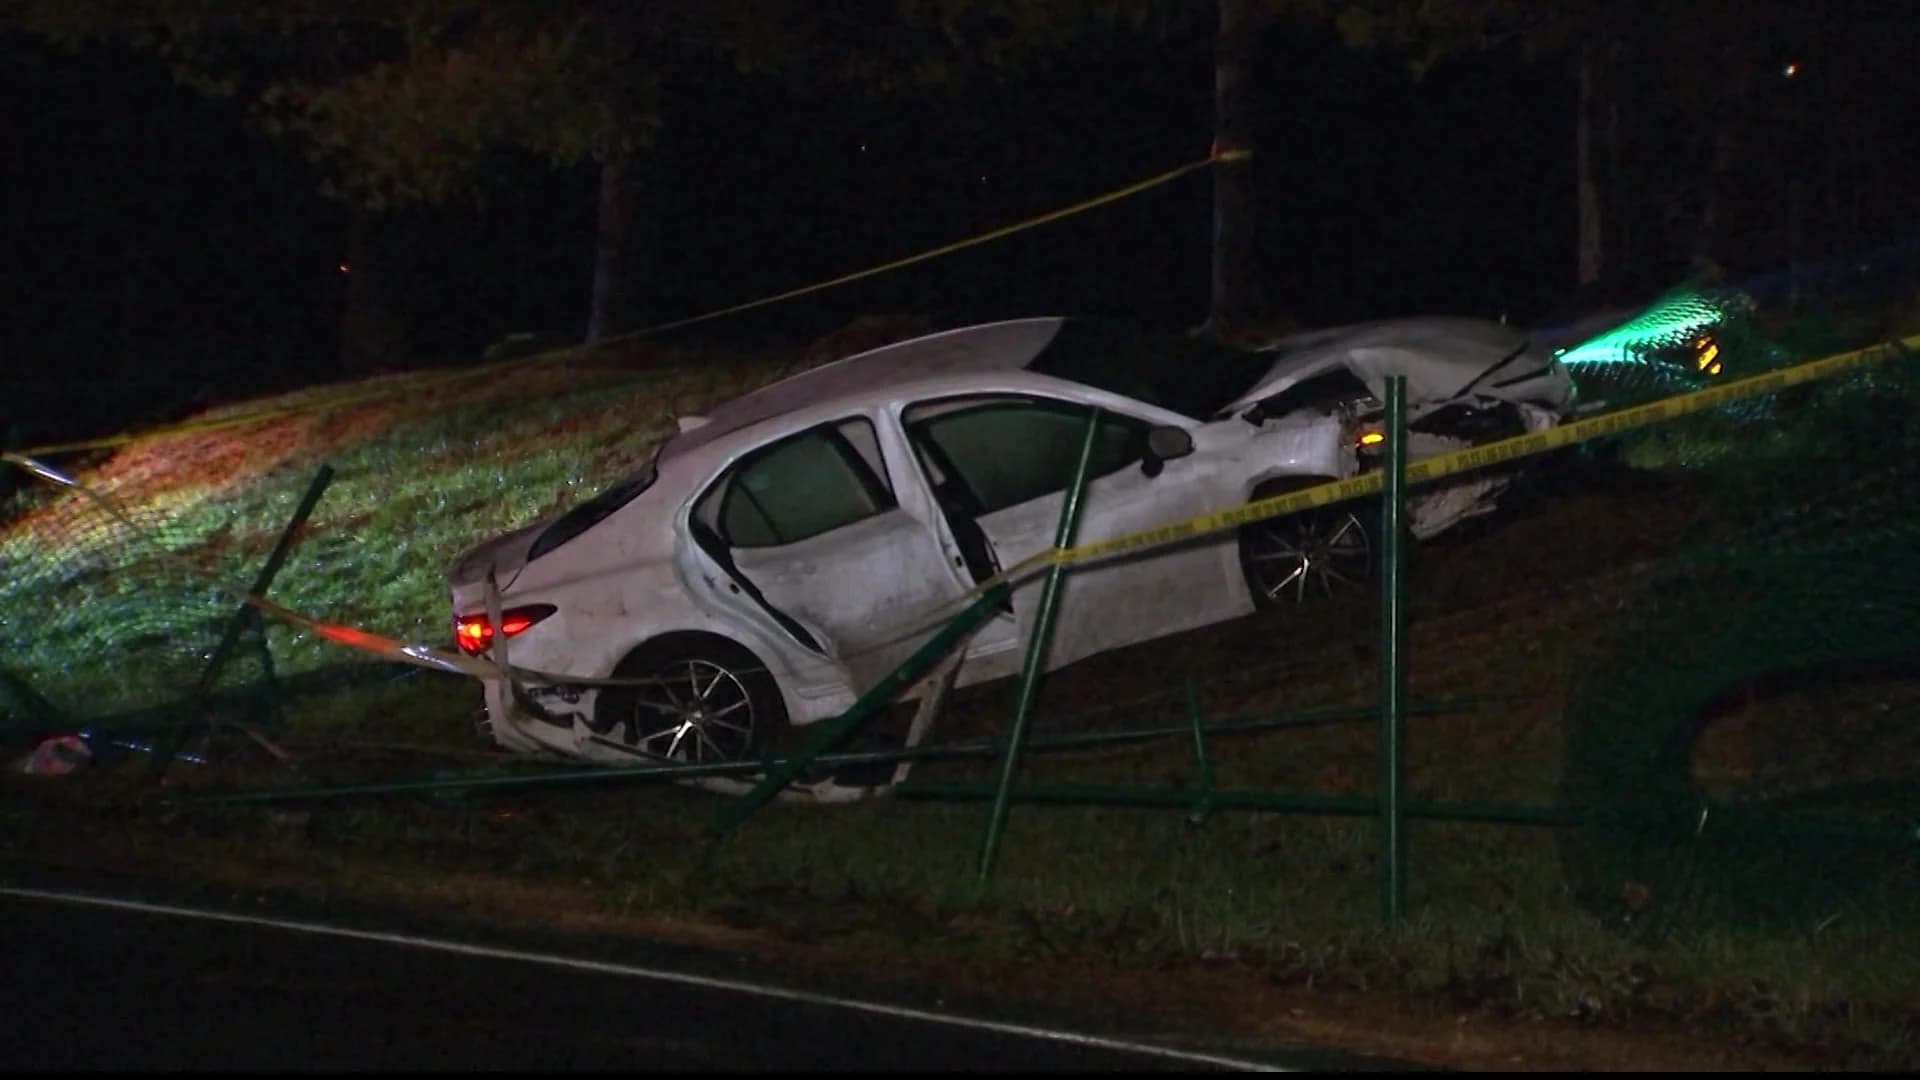 Police: Rain, fog contributed to crash that killed 2 in Haverstraw